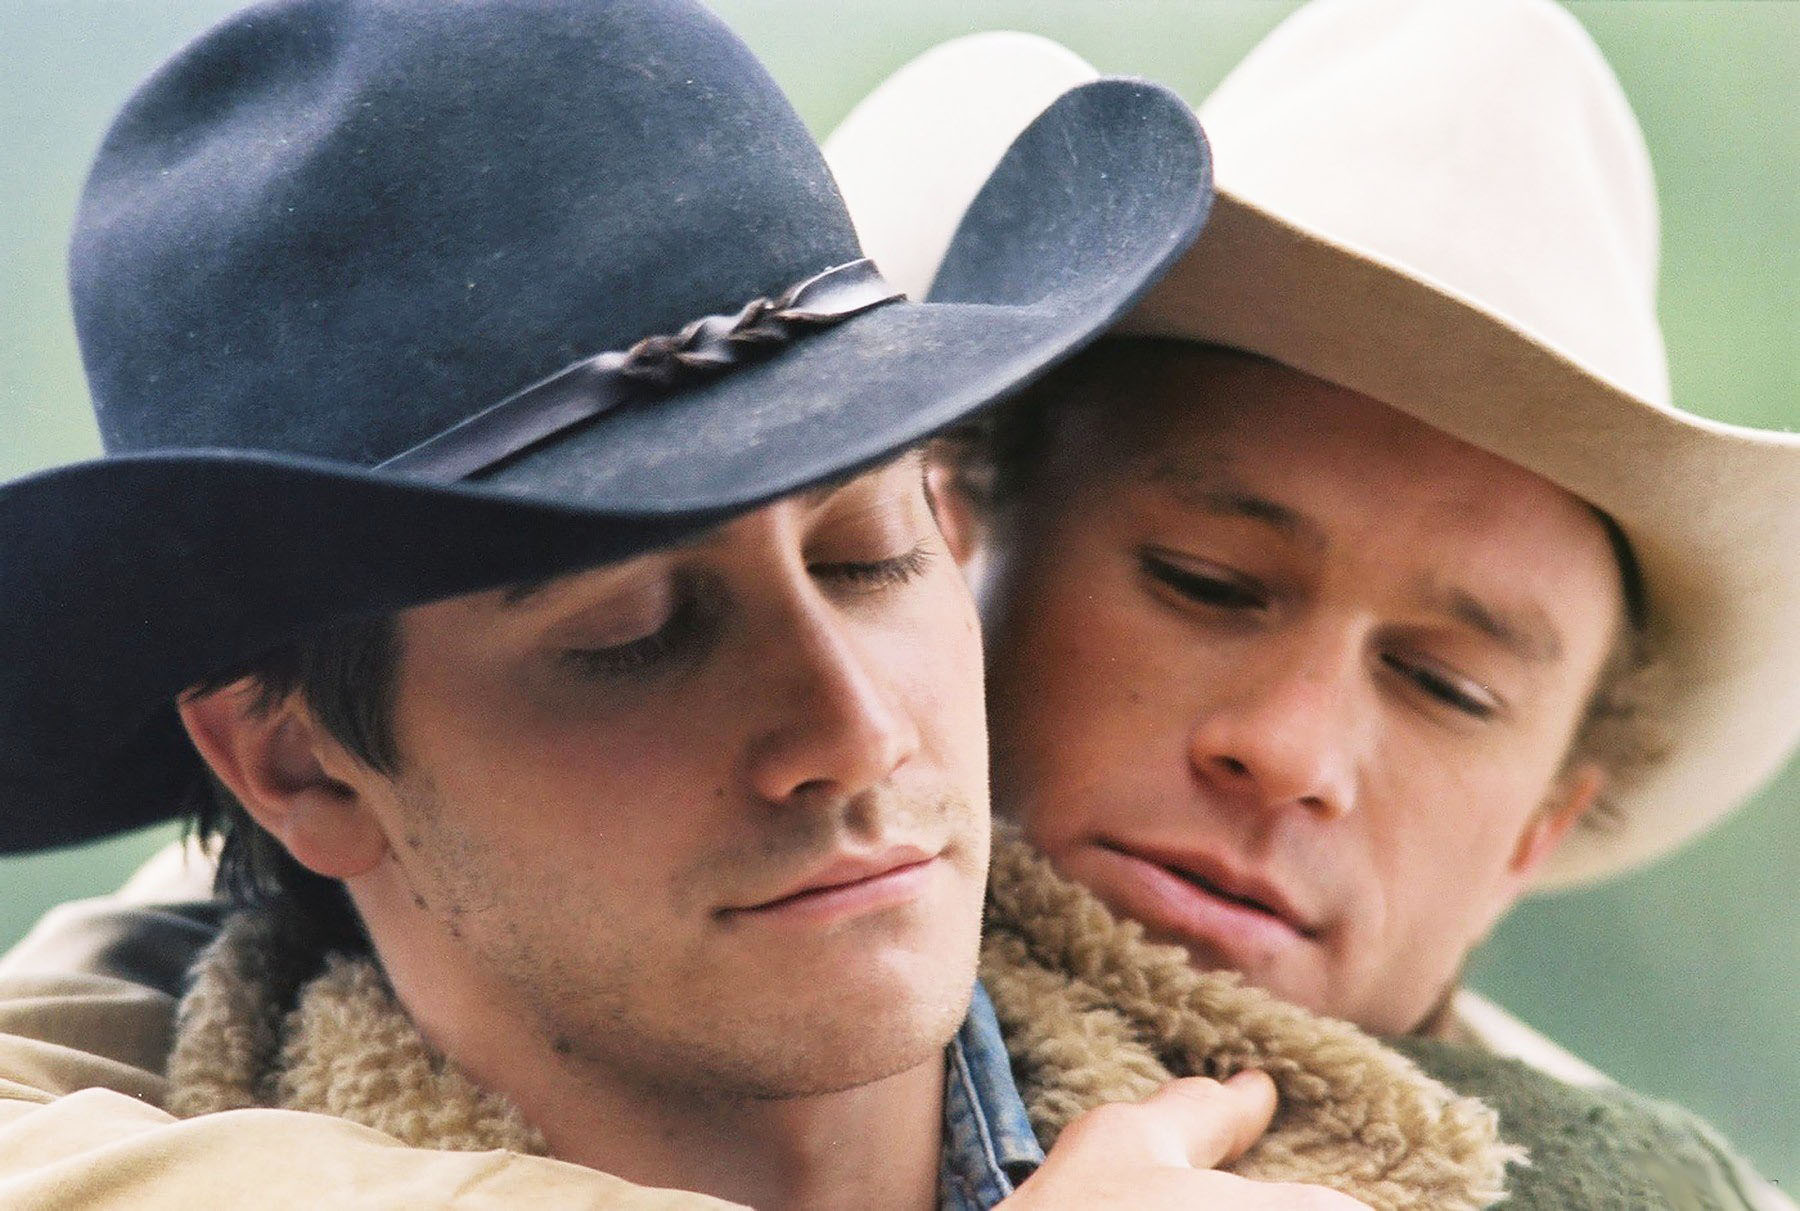 Secrets of ‘Brokeback Mountain’ – which actors turned down roles in this film?